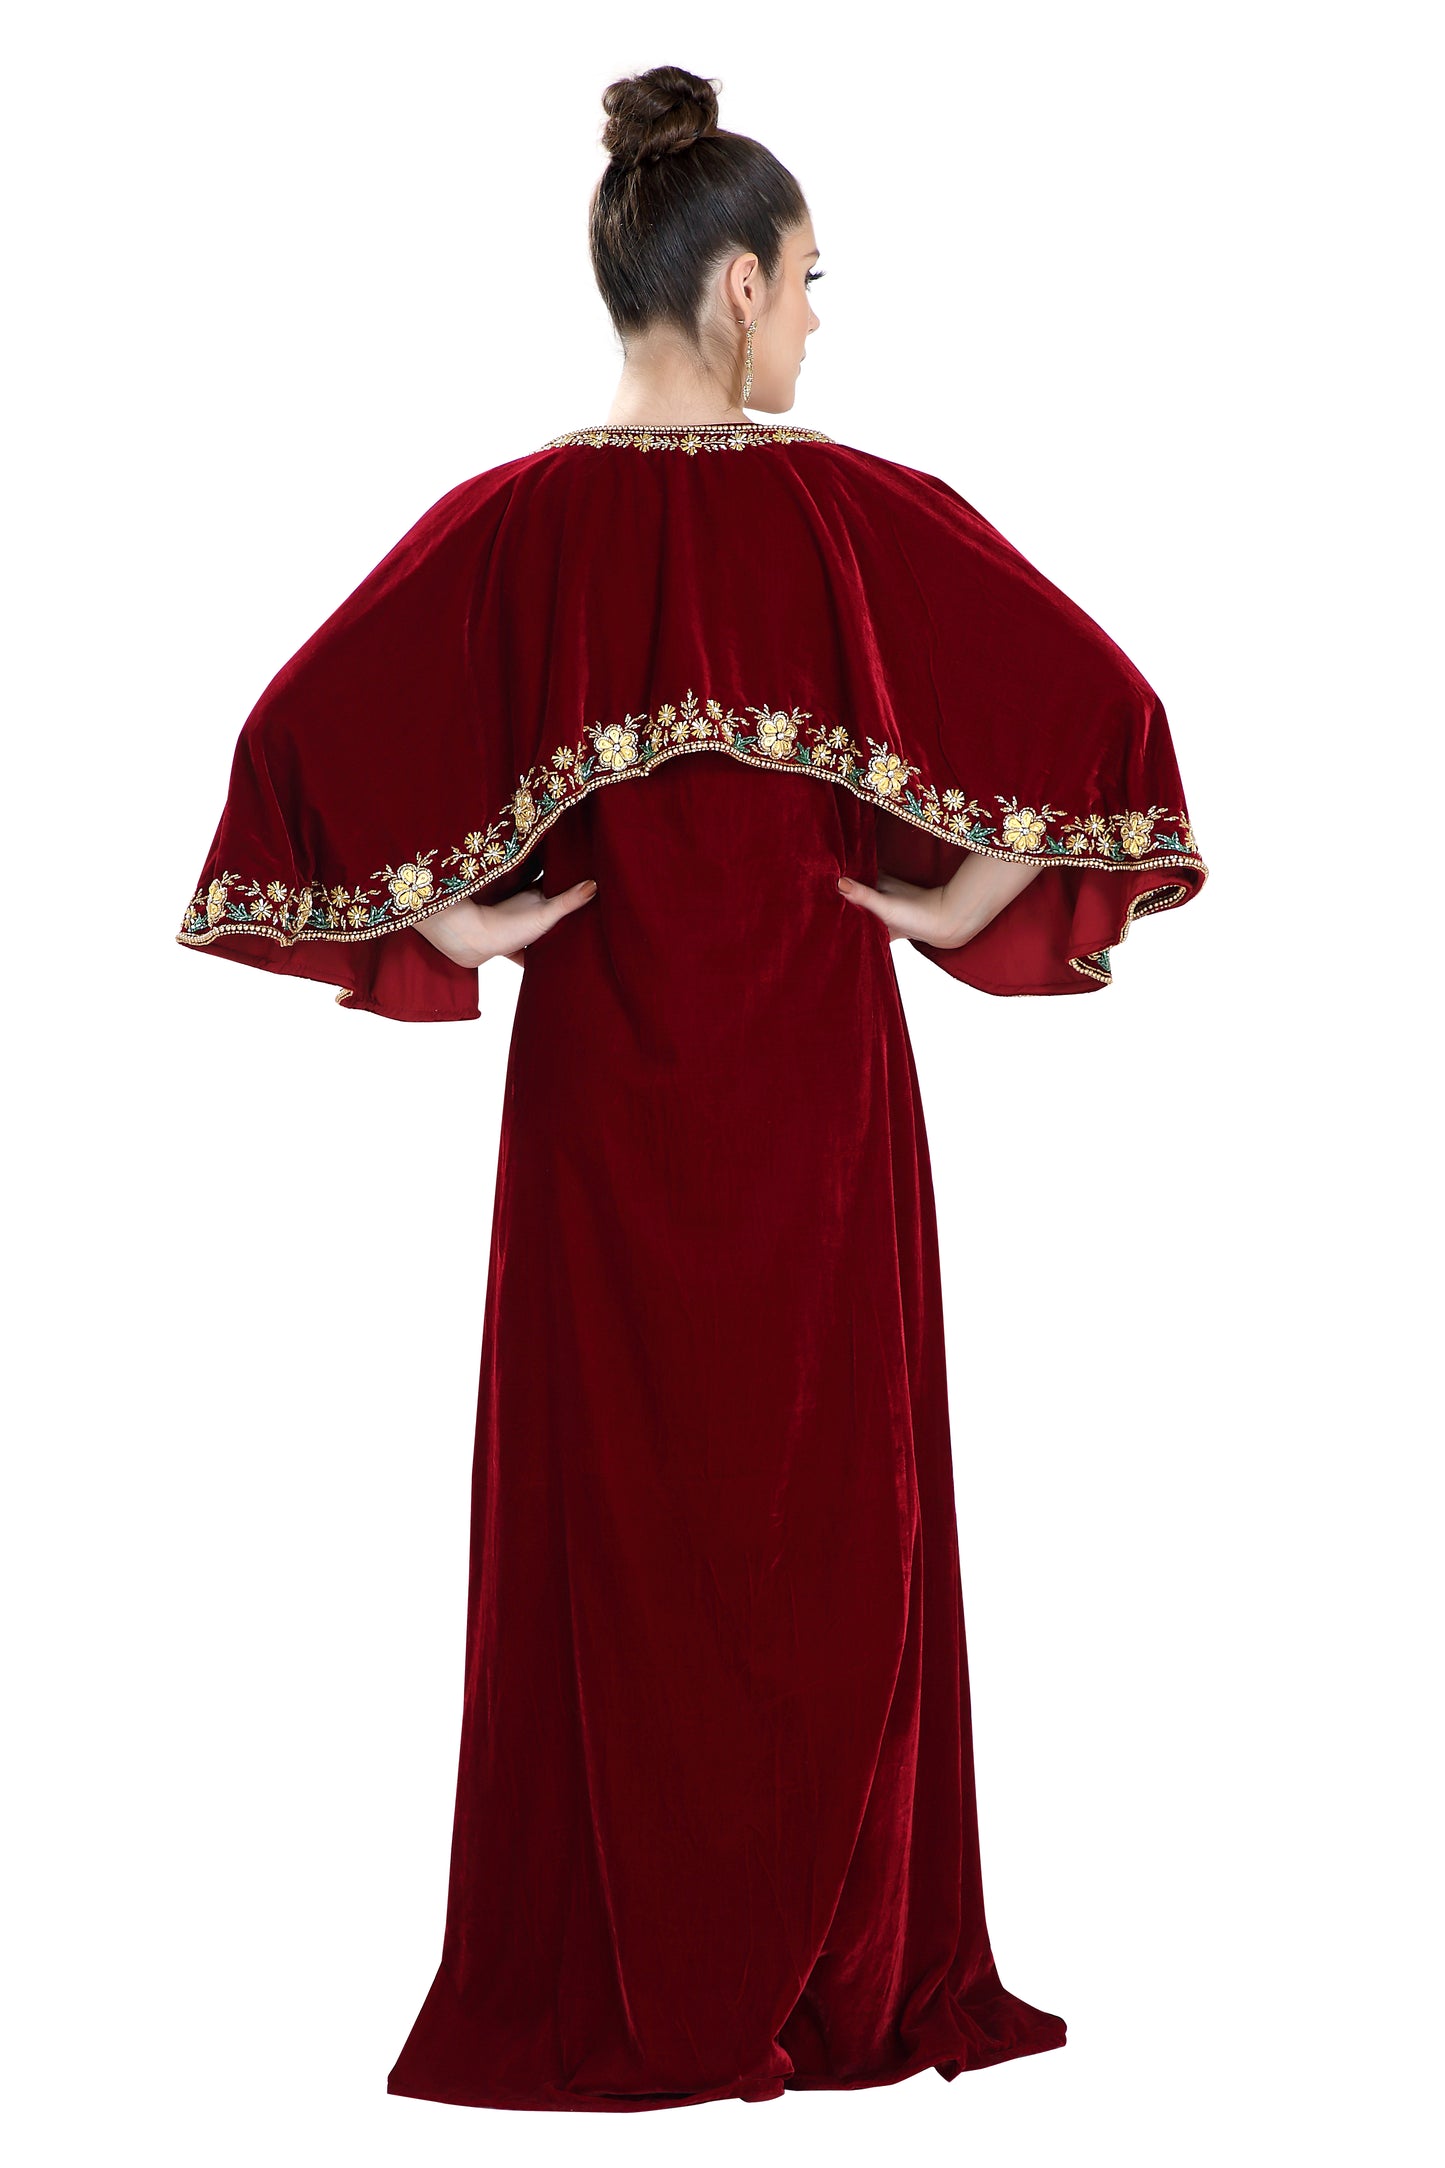 Embroidered Maxi in Maroon Velvet Fabric - Maxim Creation